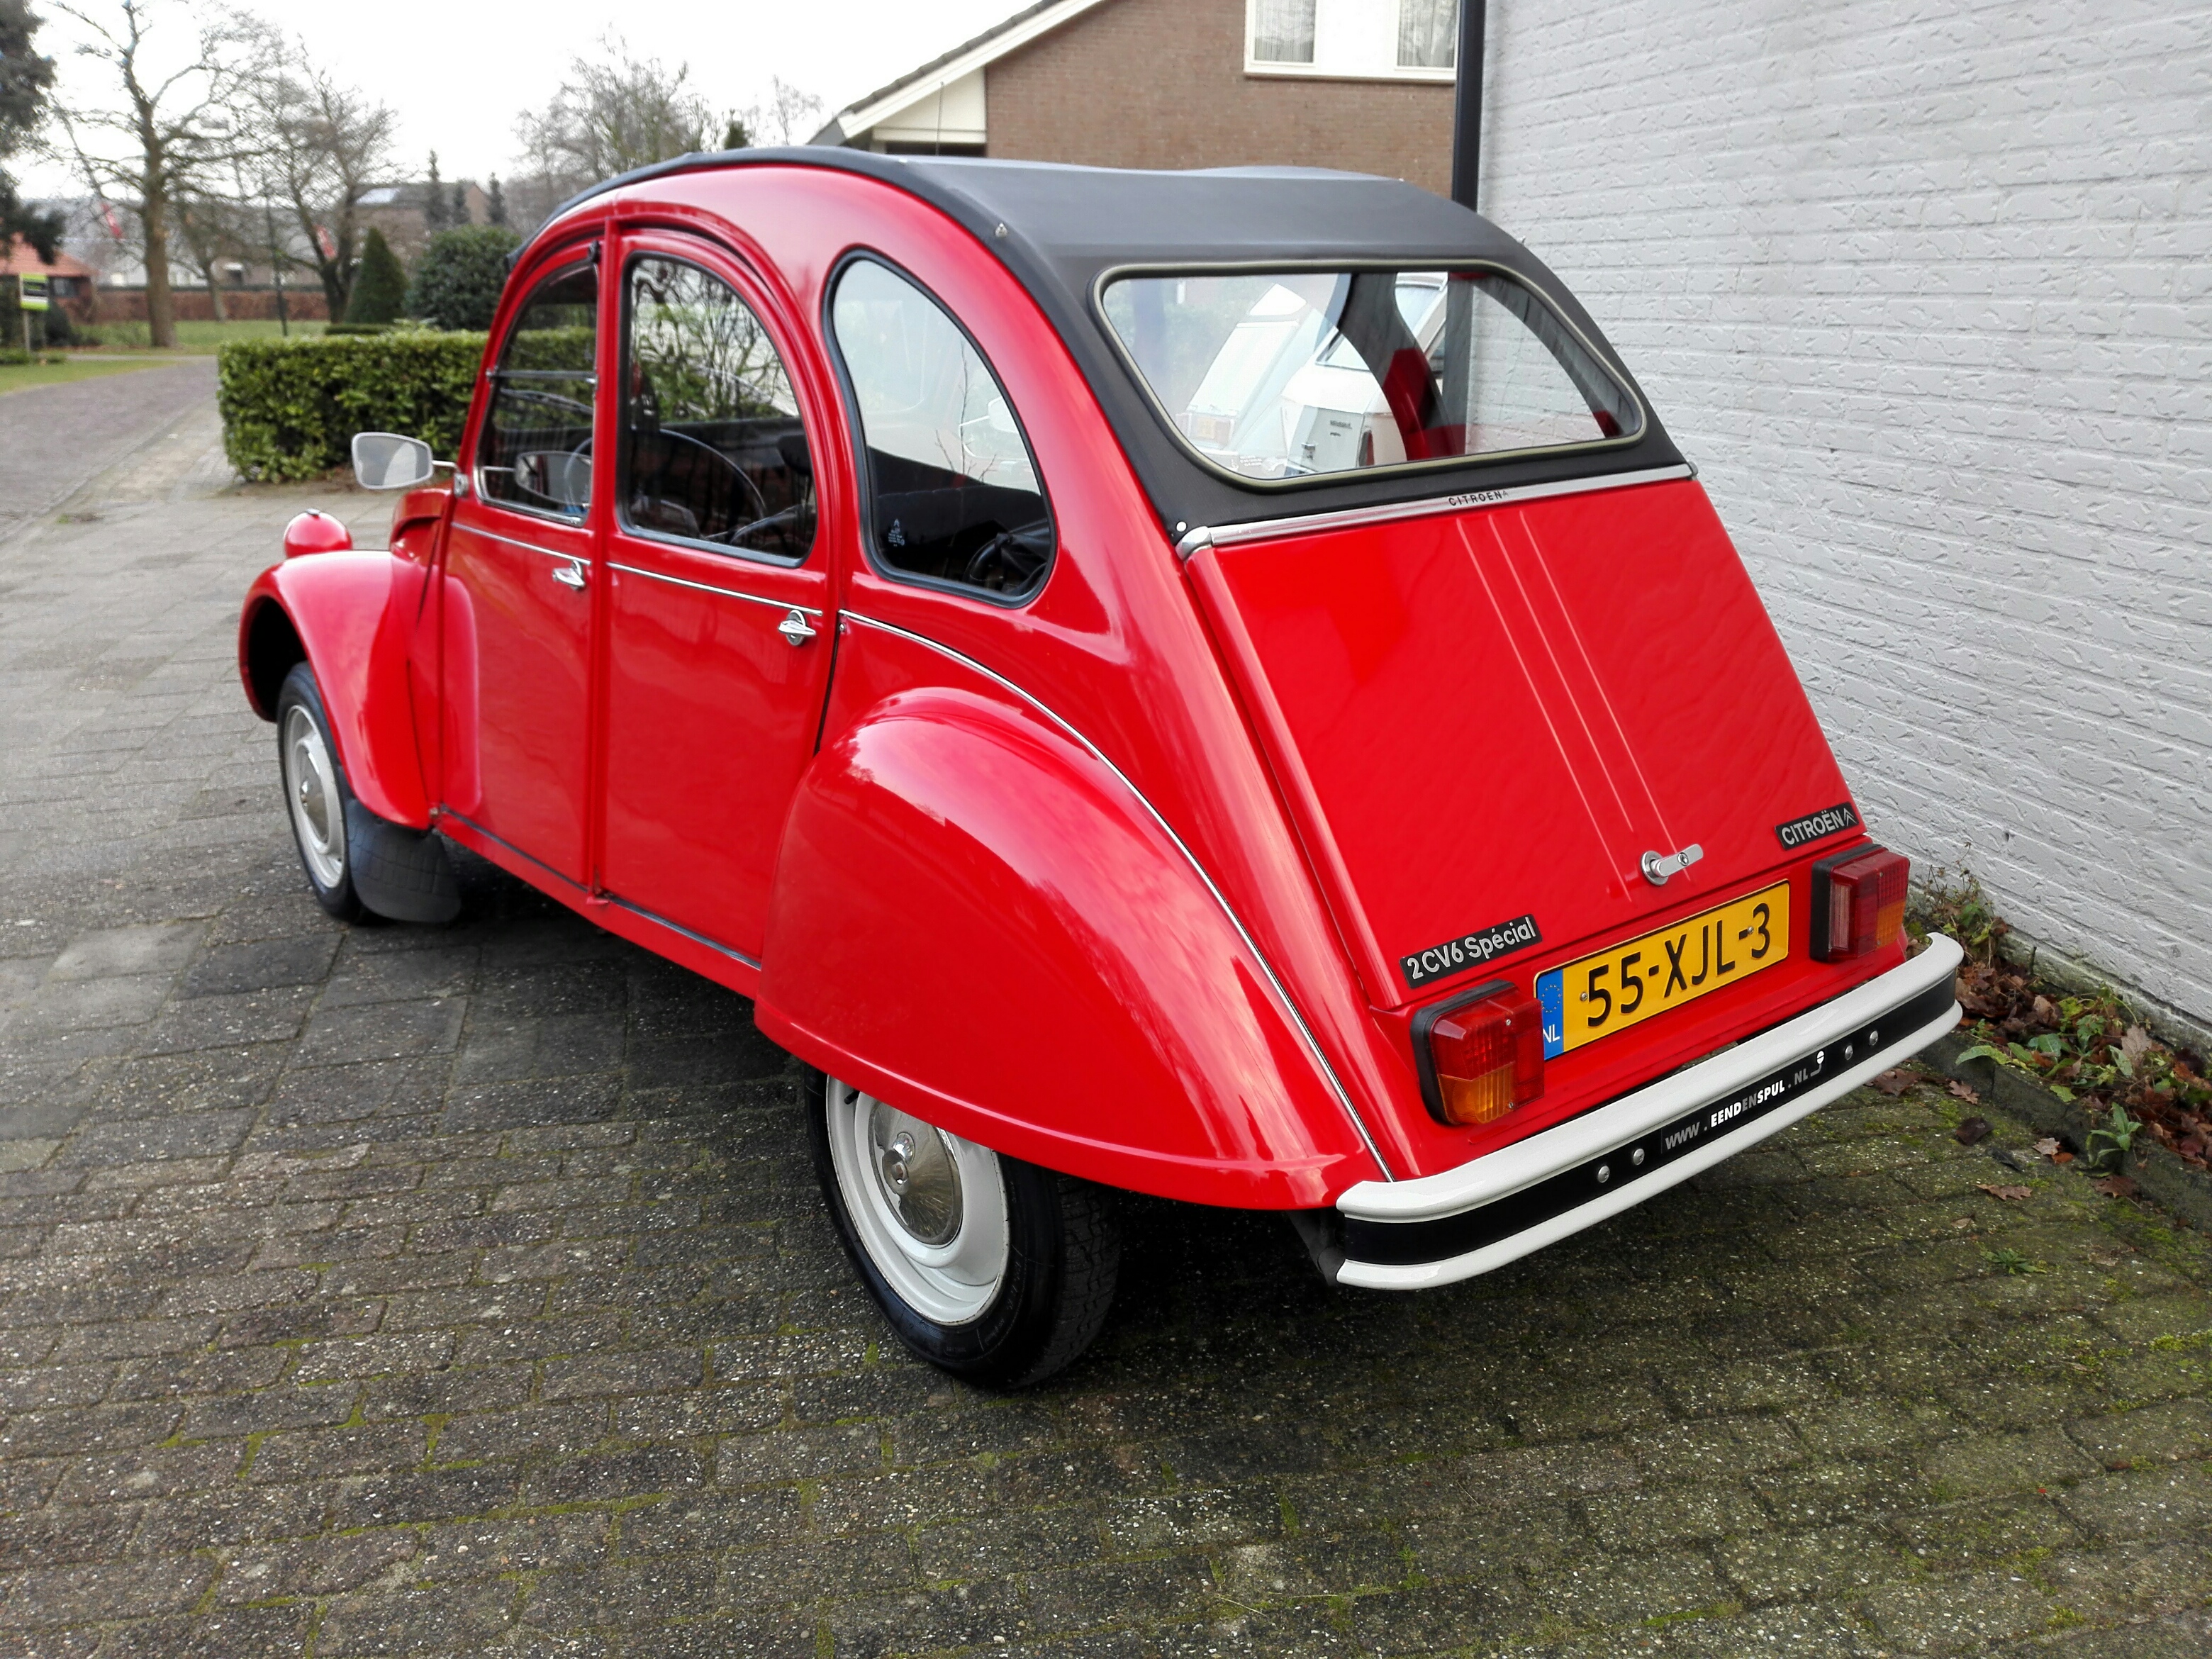 rood 55 xjl 3 2